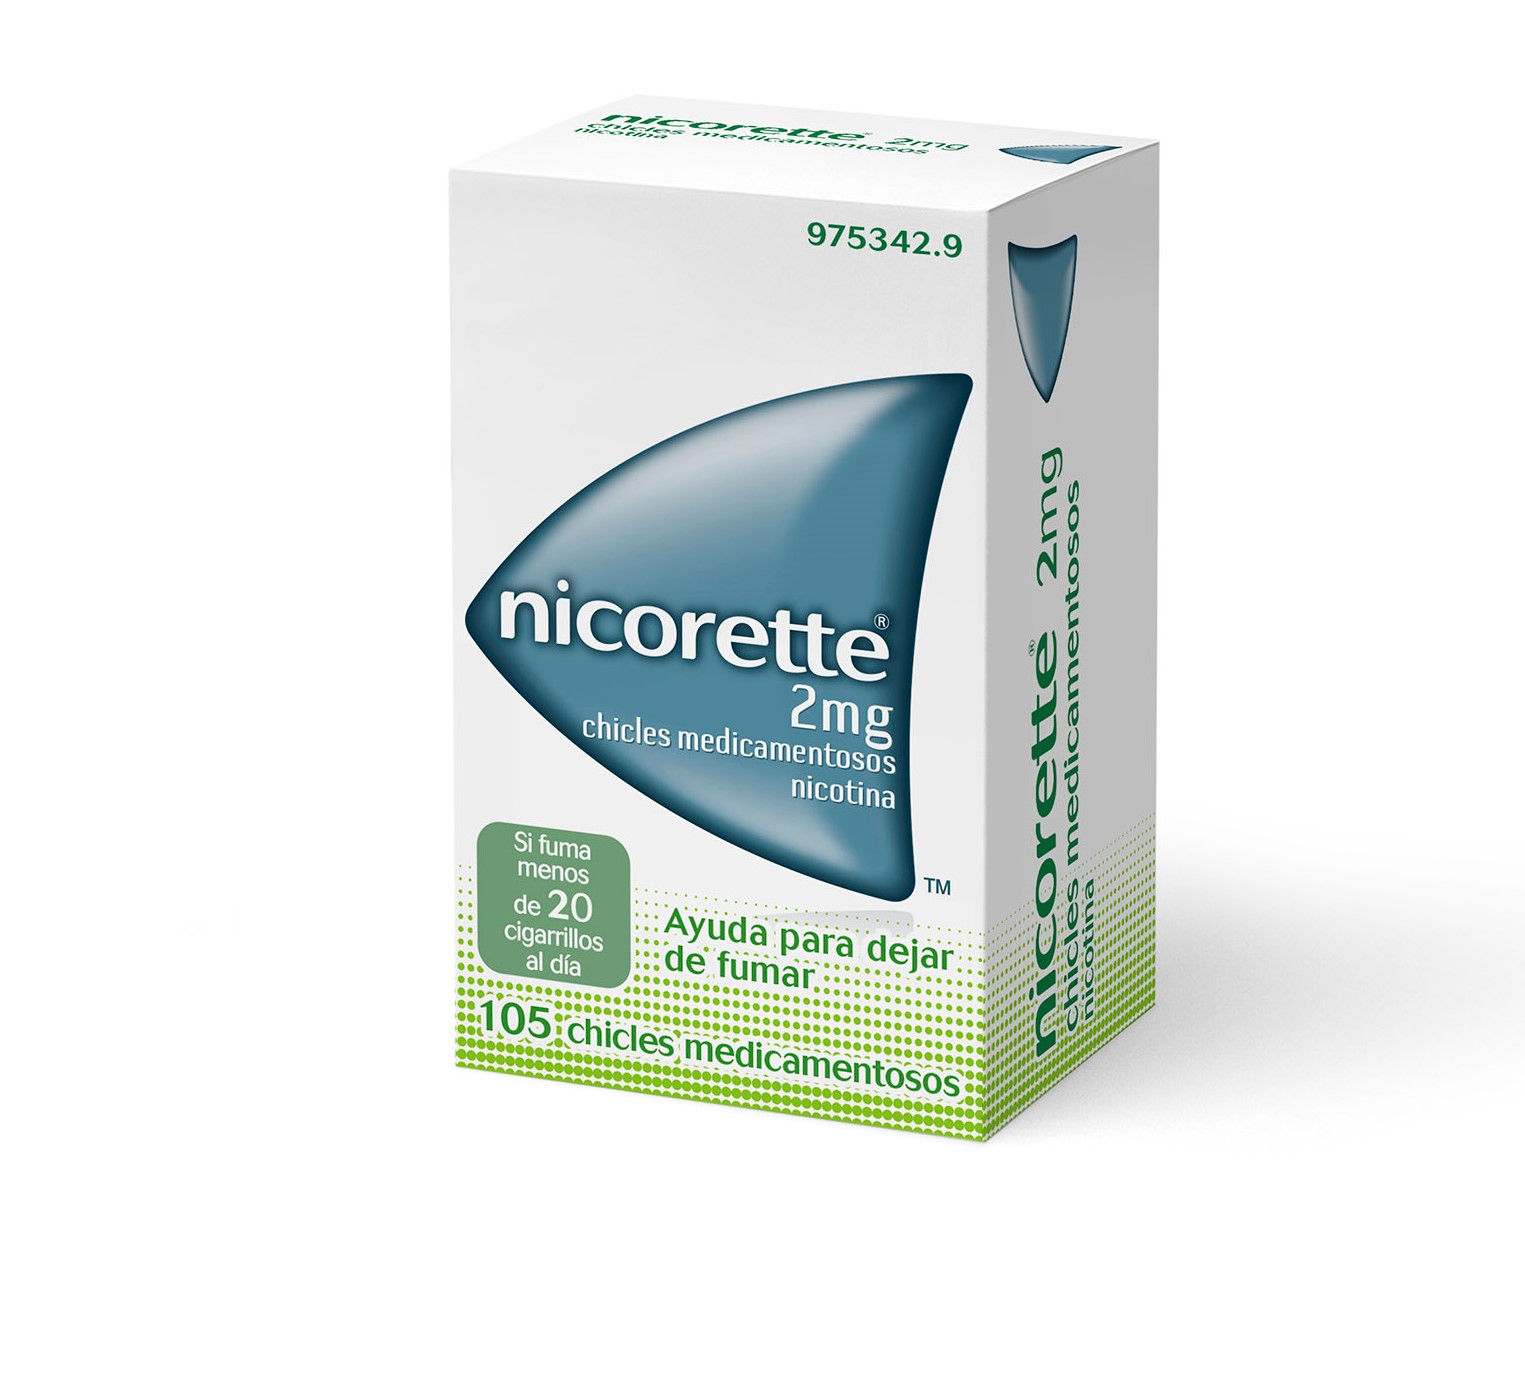 NICORETTE 2 MG CHICLES MEDICAMENTOSOS 105 CHICLES